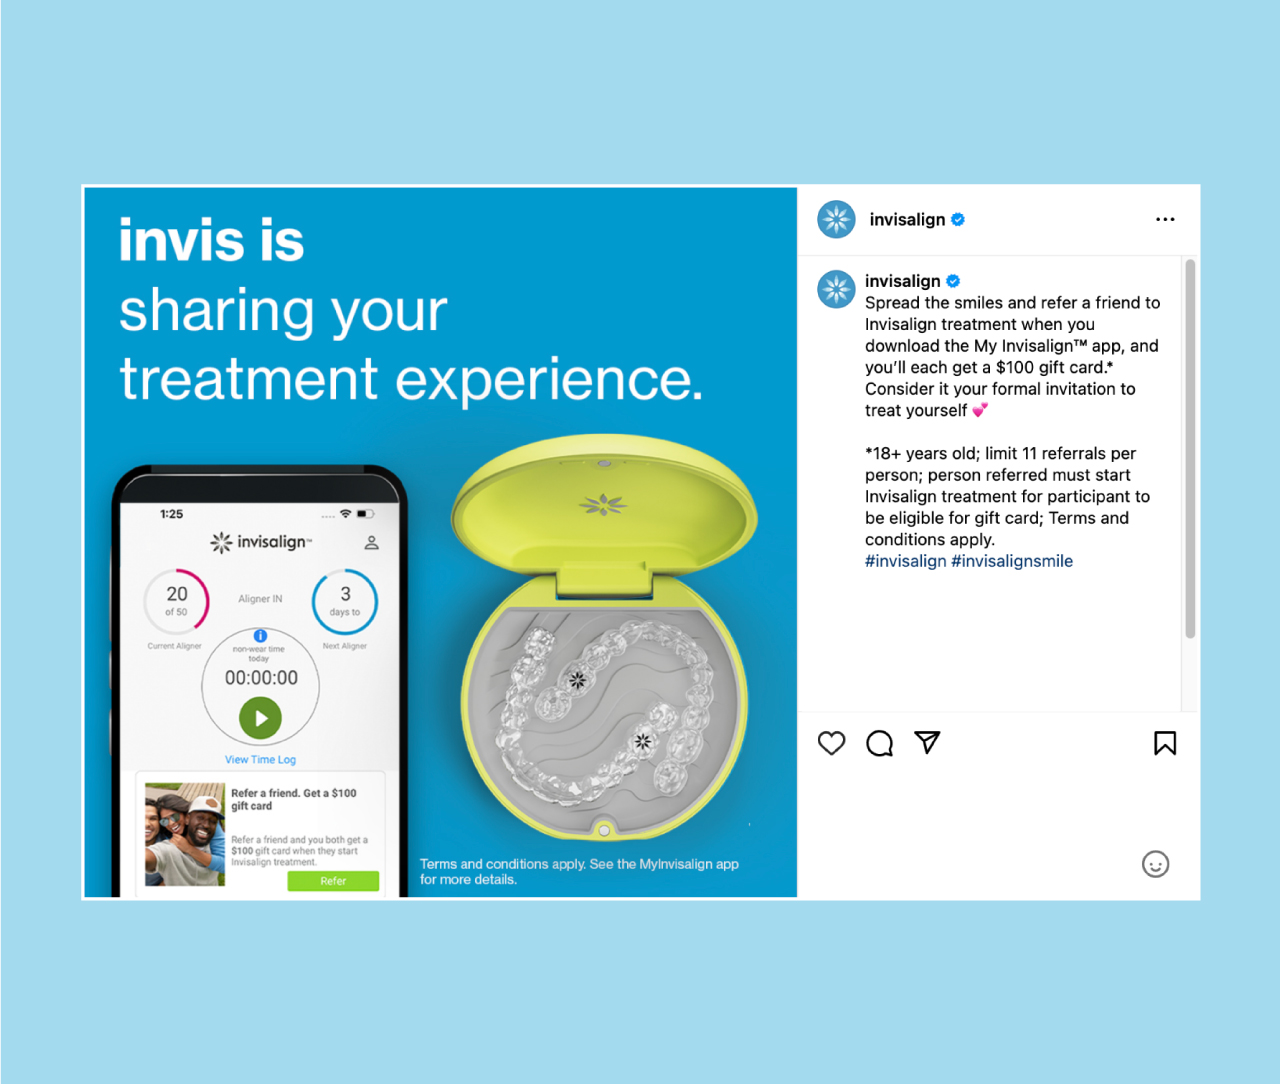 Invisalign social media post that says "Invis is sharing your treatment experience"